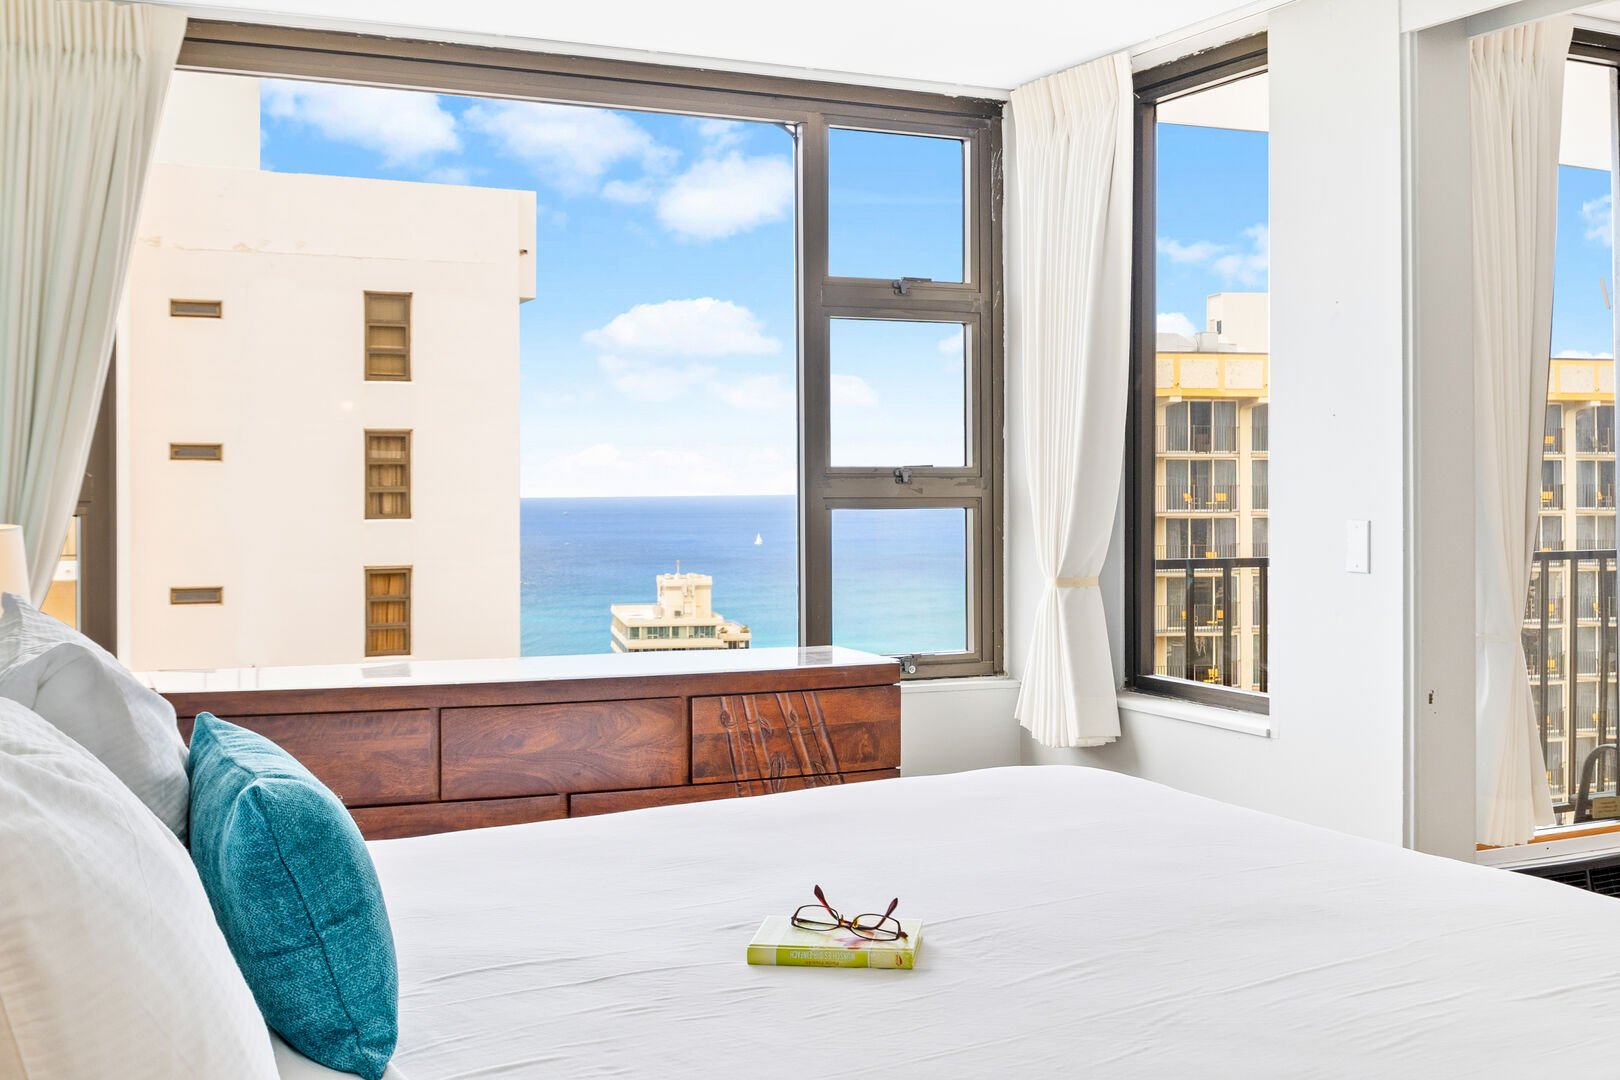 The bedroom features a king-size bed and a gorgeous view of the Ocean!